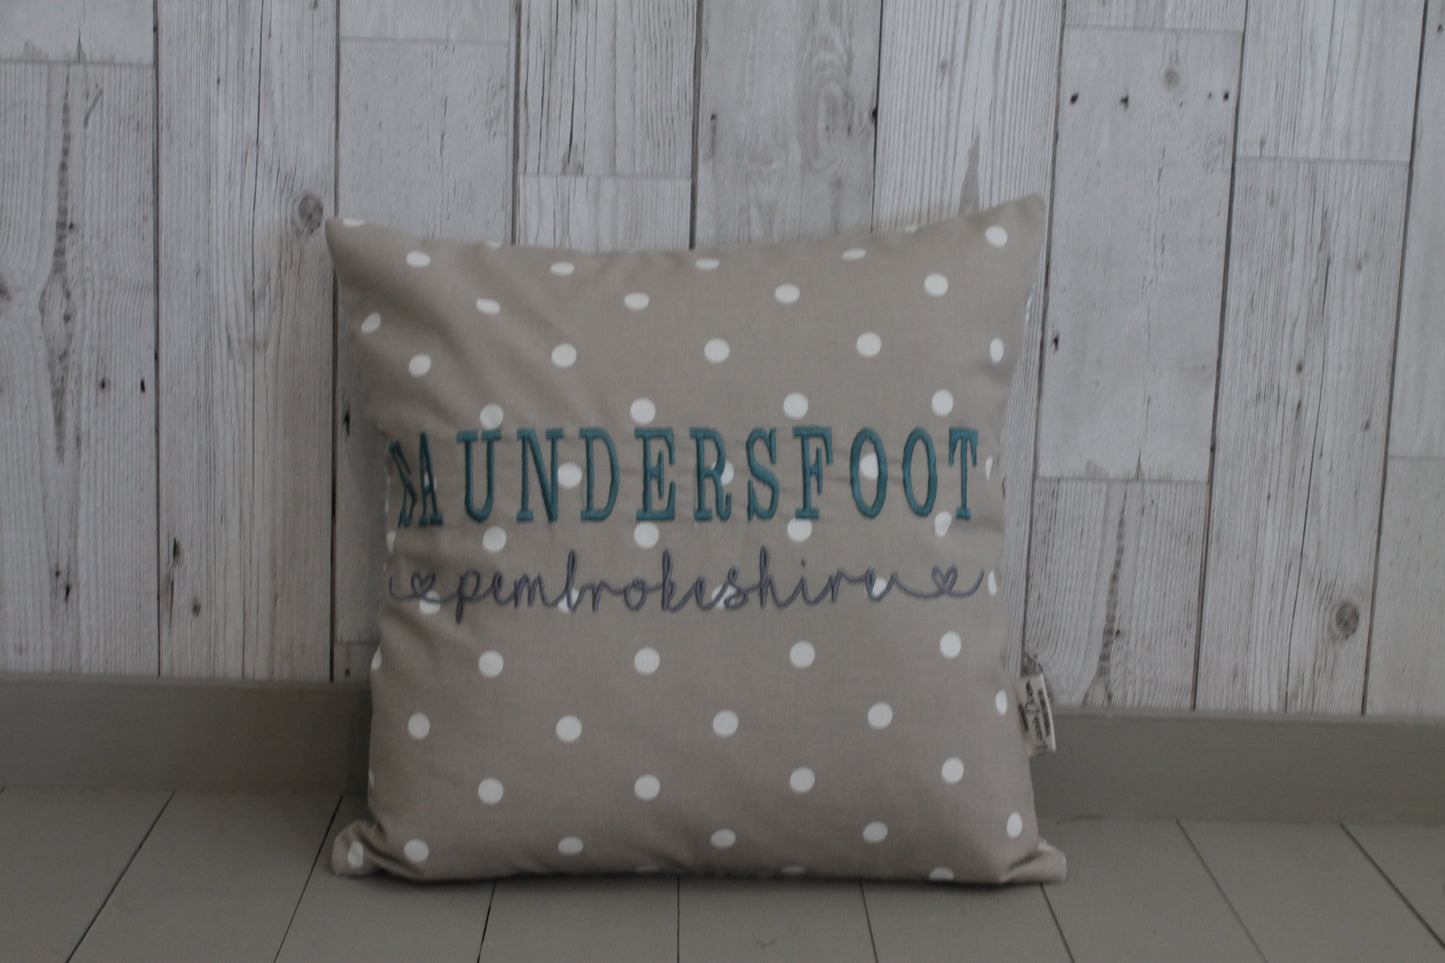 Location Cushion - 16" Taupe Dotty and Shell-Square - Lizzie Dixon Designs